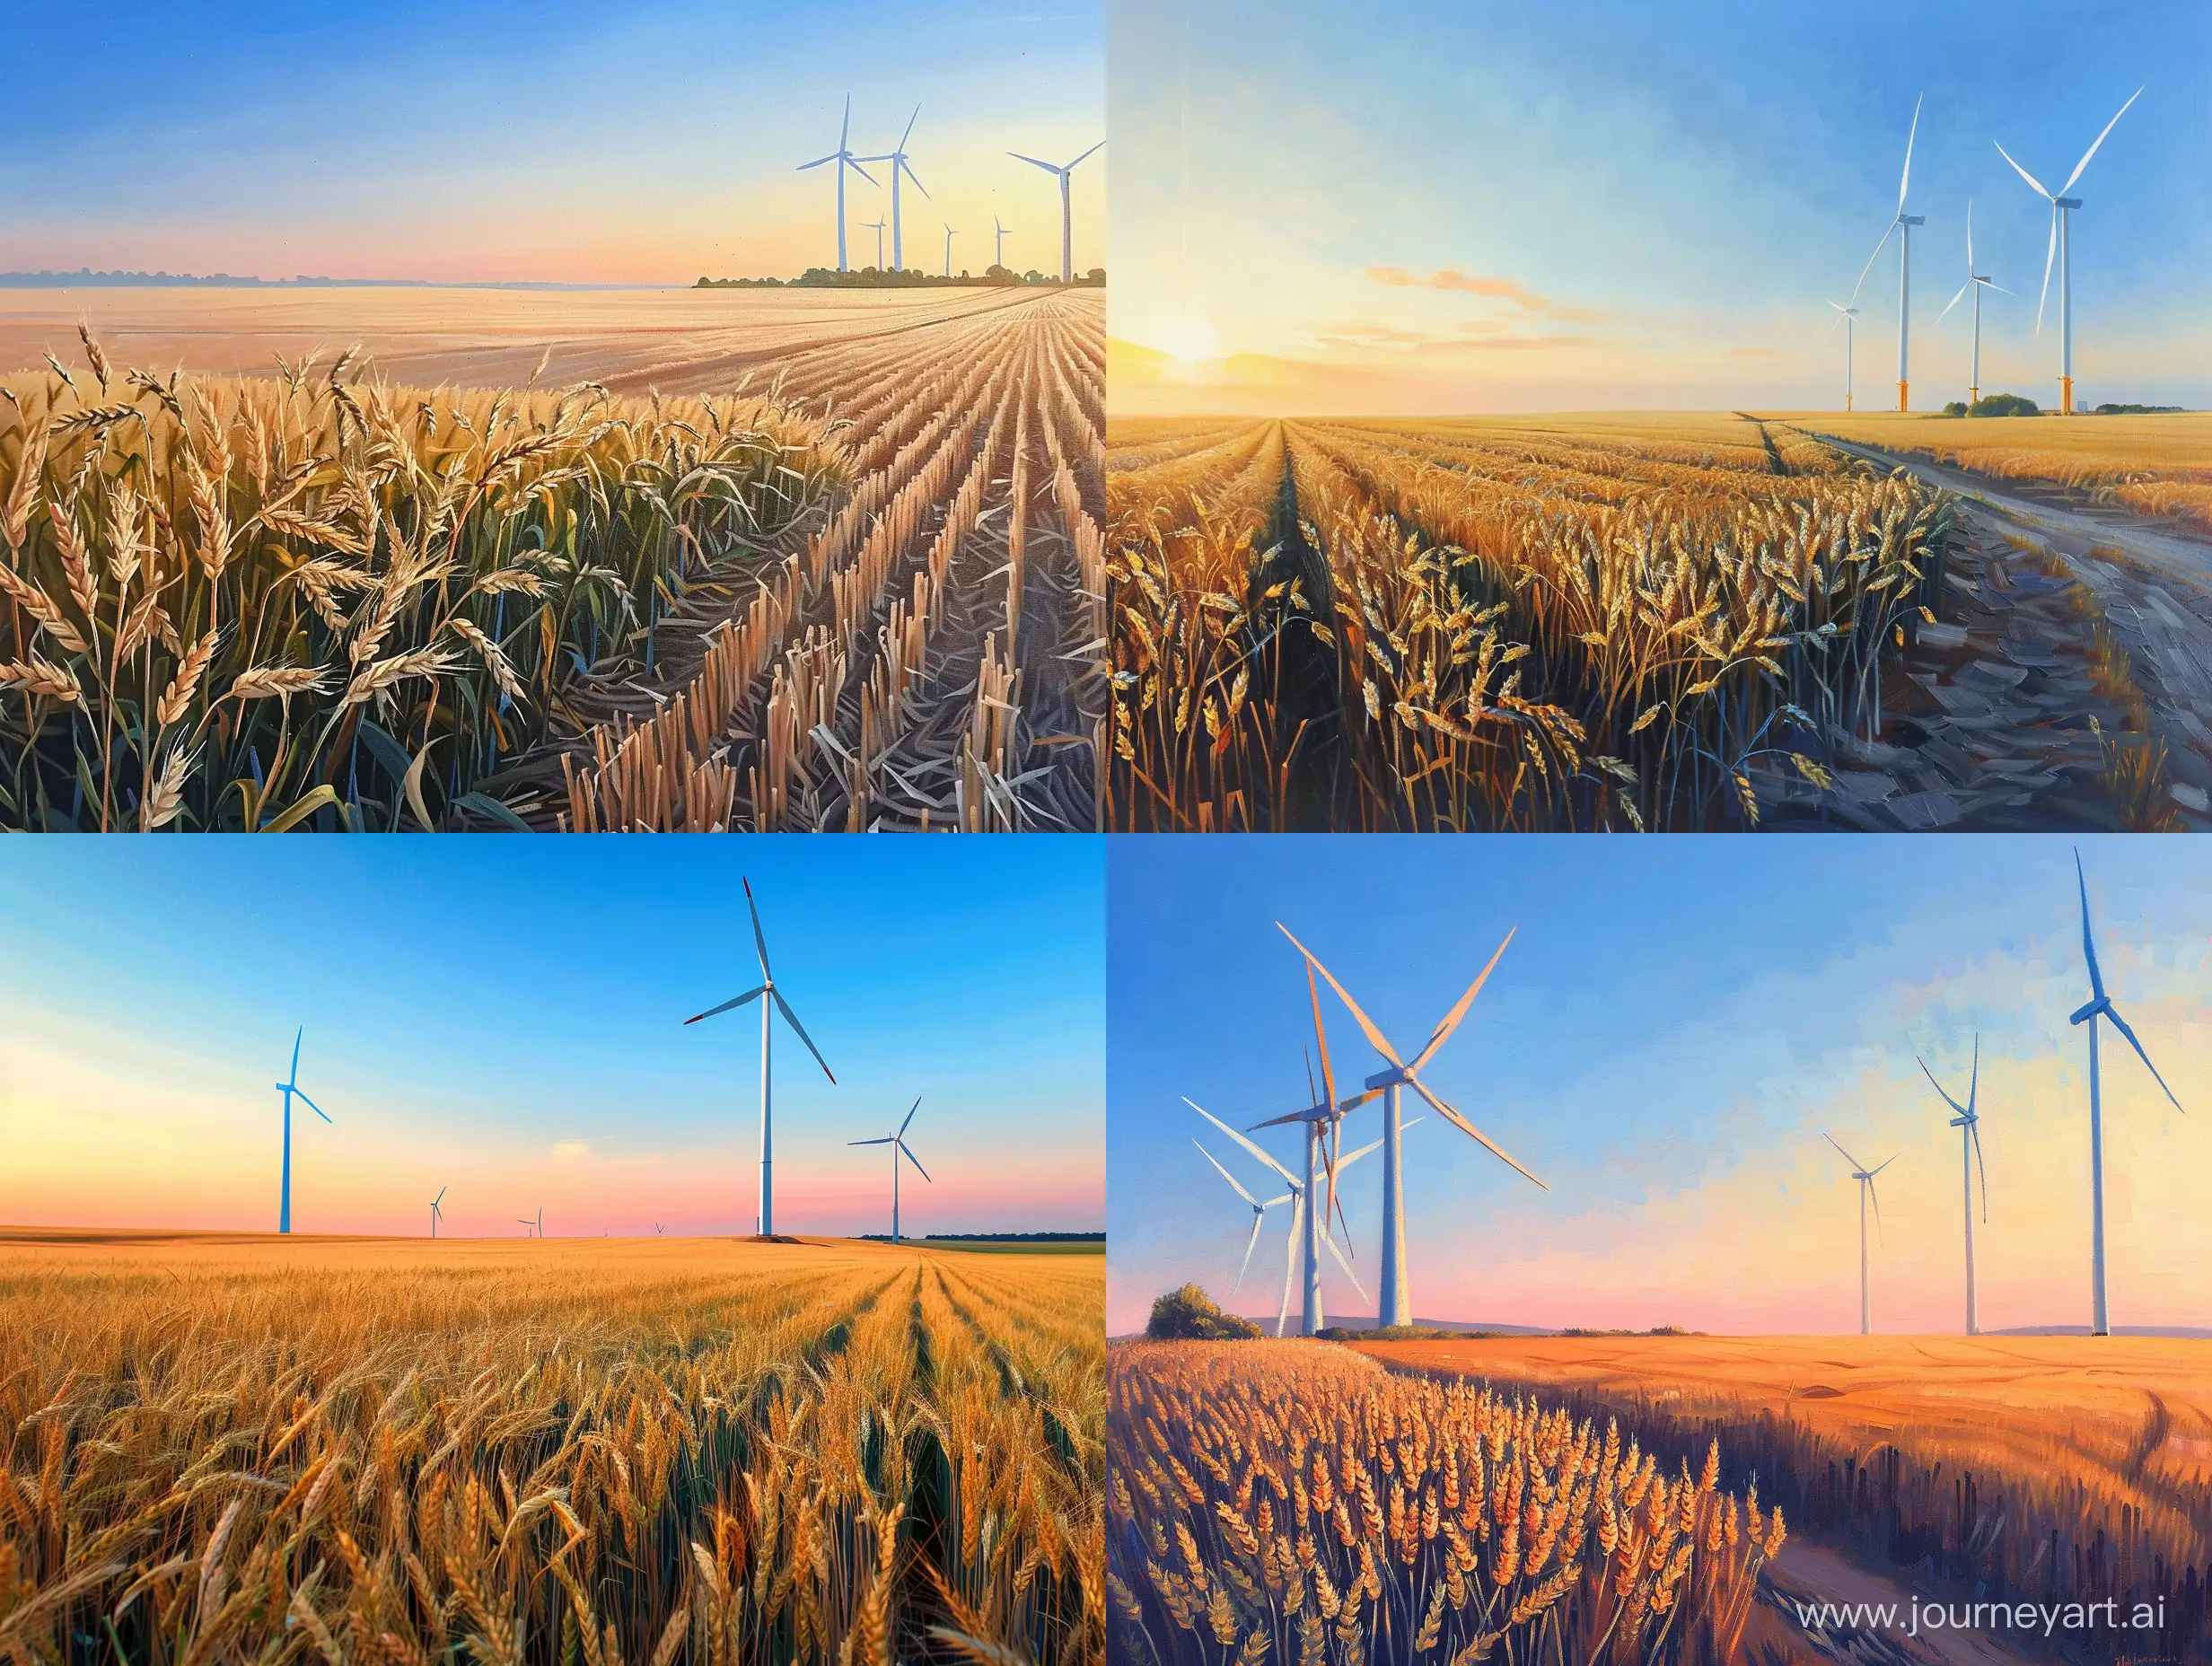 Rural-Landscape-with-Wind-Turbines-at-Sunset